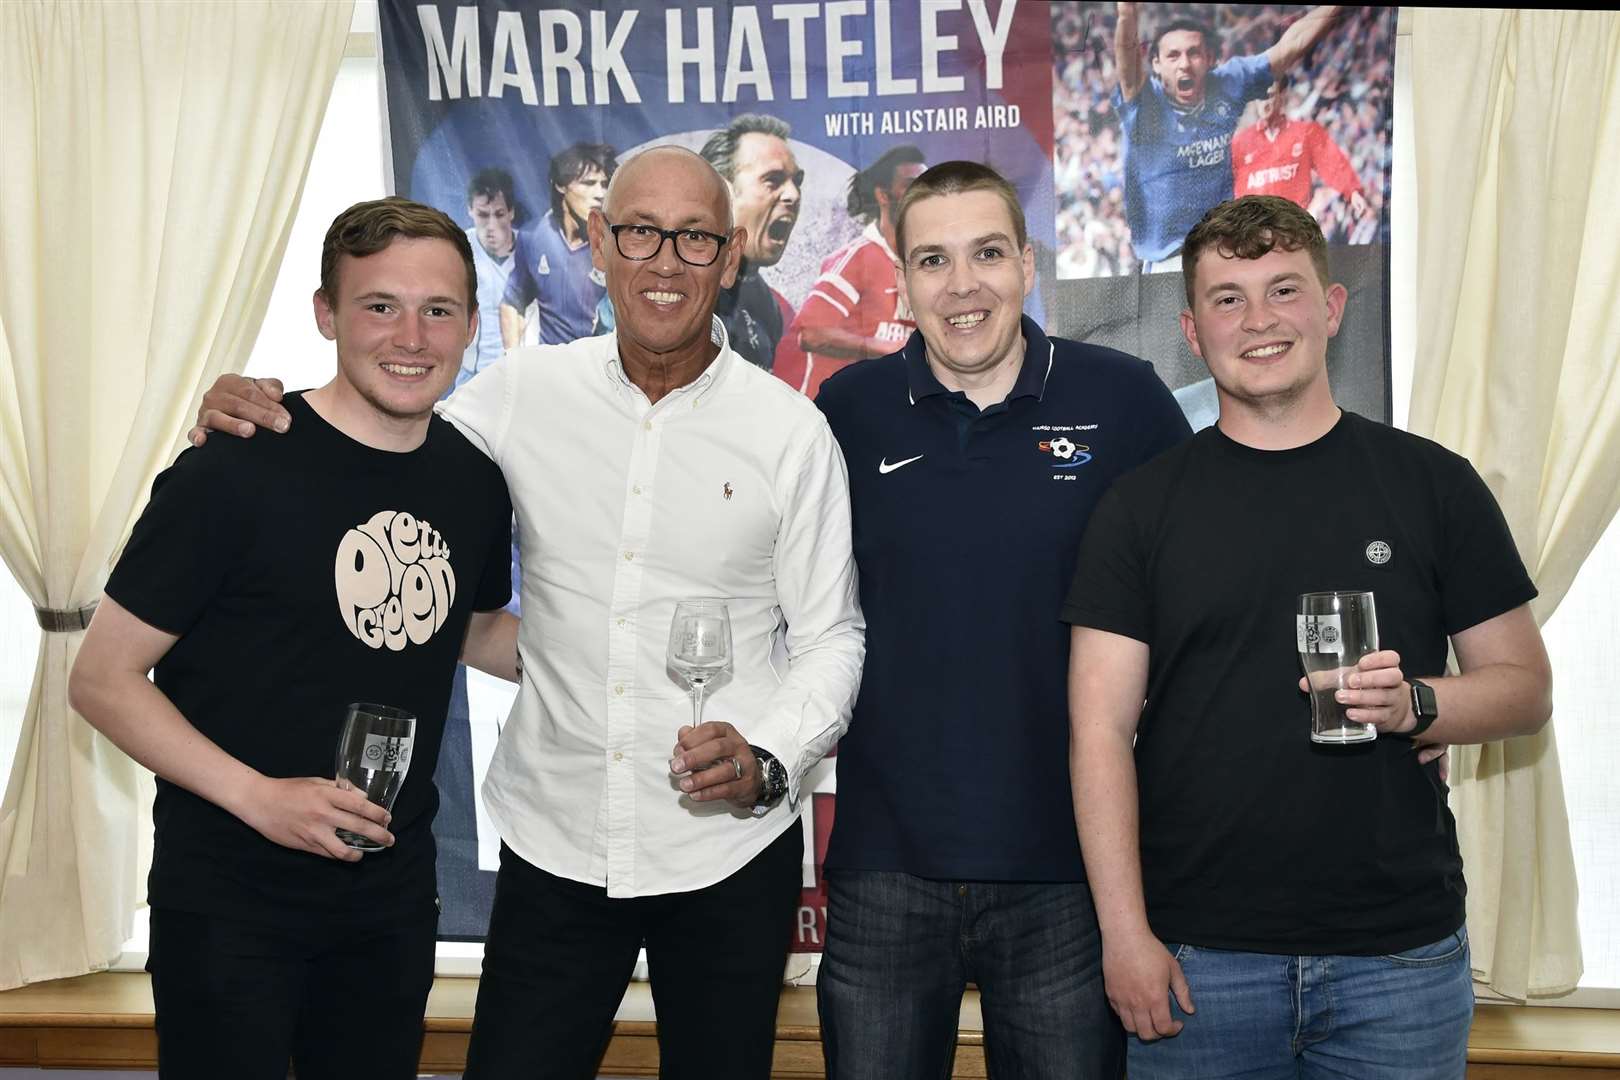 Glass mementoes were presented to Mark Hateley and the Rangers coaches. From left: Calum Ross (Rangers coach), Mark Hateley, Alyn Gunn (Thurso Football Academy) and Zander Carruth (Rangers coach). Picture: Mel Roger